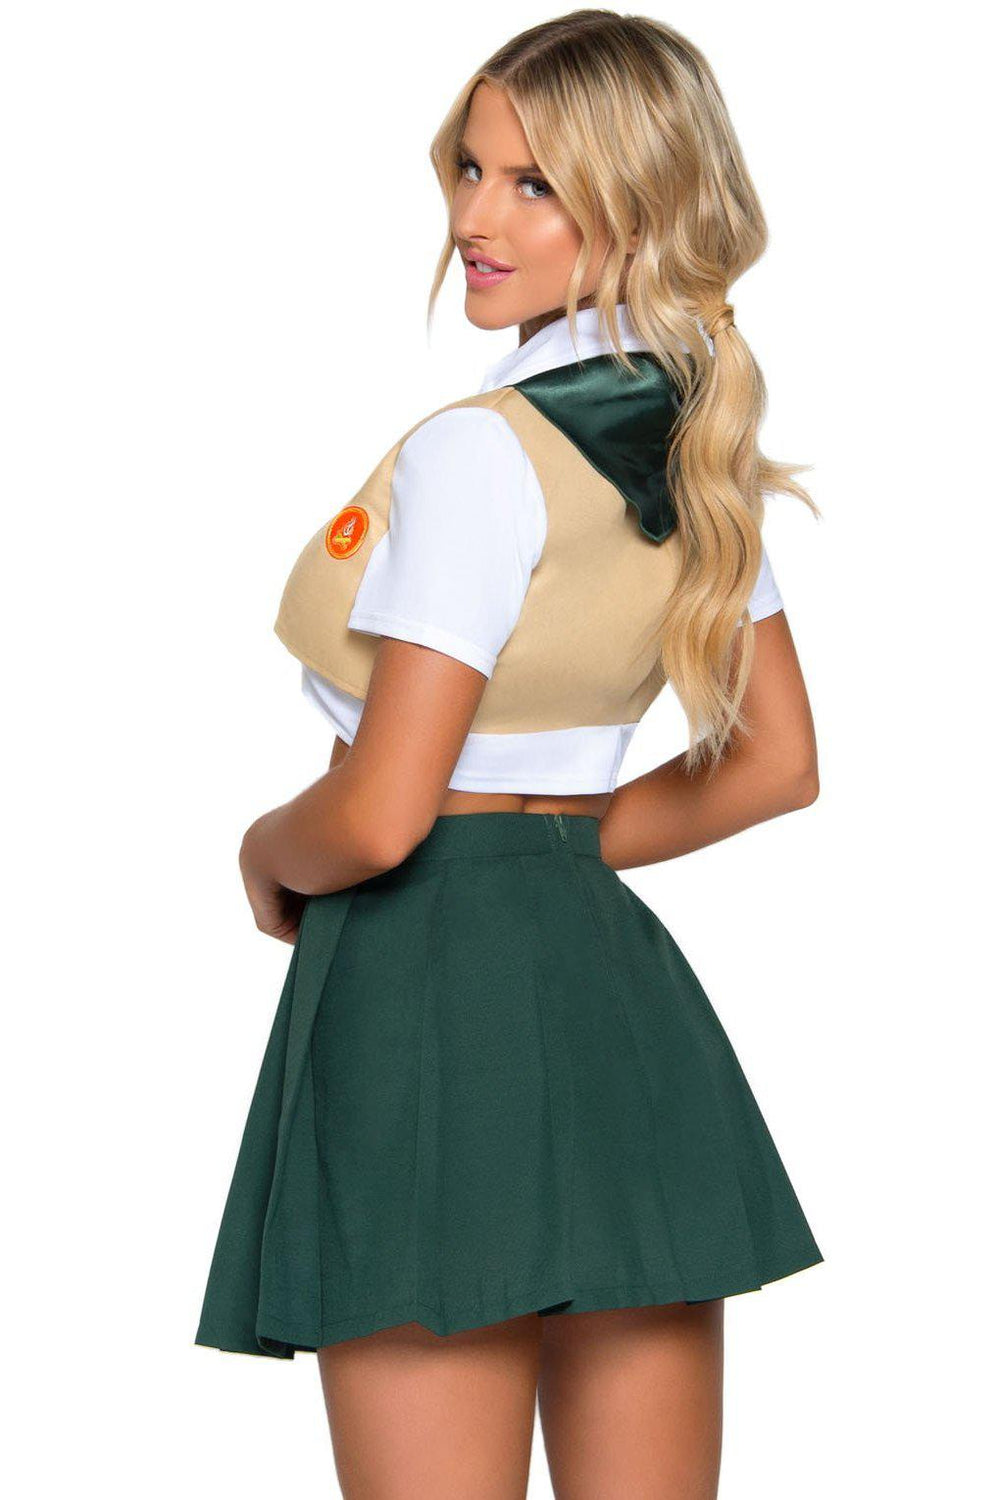 Sexy Scout Costume-School Girl Costumes-Leg Avenue-SEXYSHOES.COM